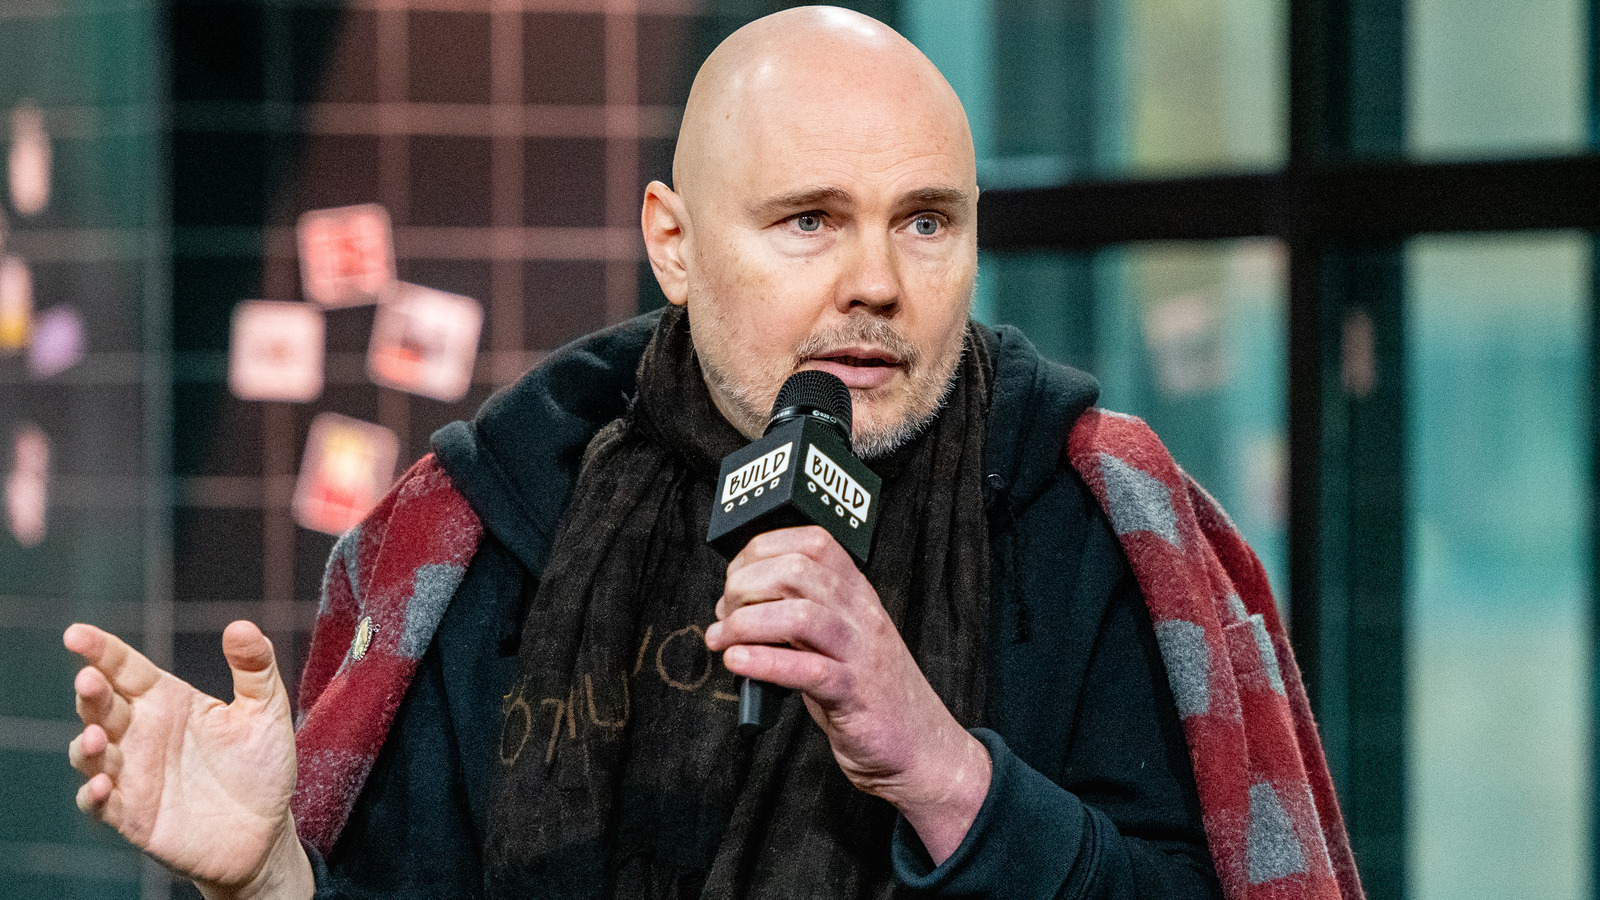 NWA's Billy Corgan Discusses Impact Of WWE's Netflix Deal